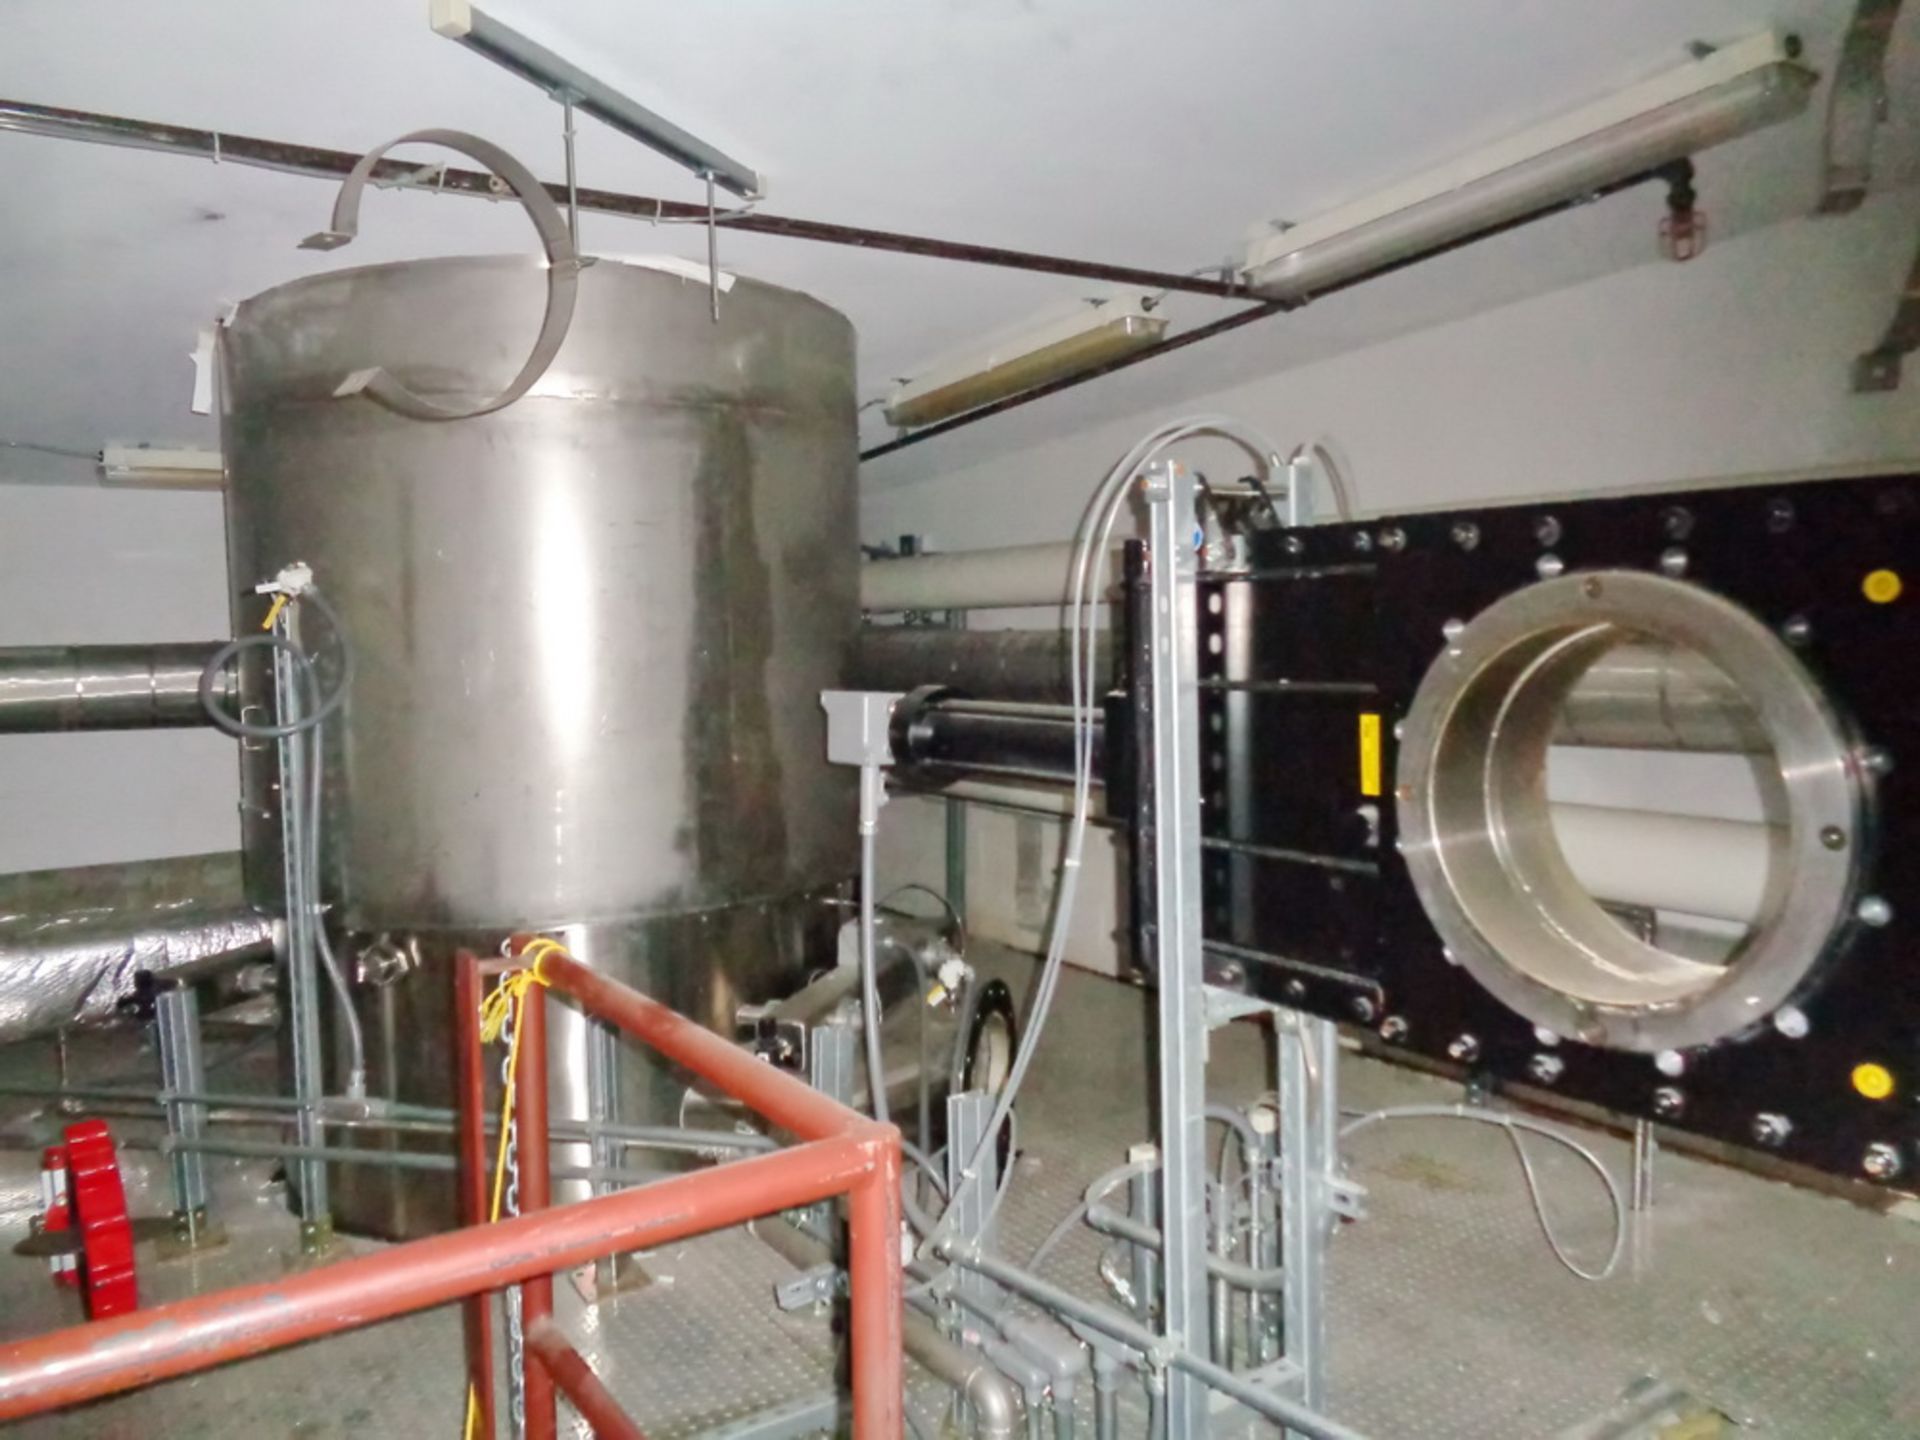 Vector Stainless Steel Fluid Bed Dryer, Model VFC-120M, SN FL-478, Project #46254 and 46613 - Image 28 of 35